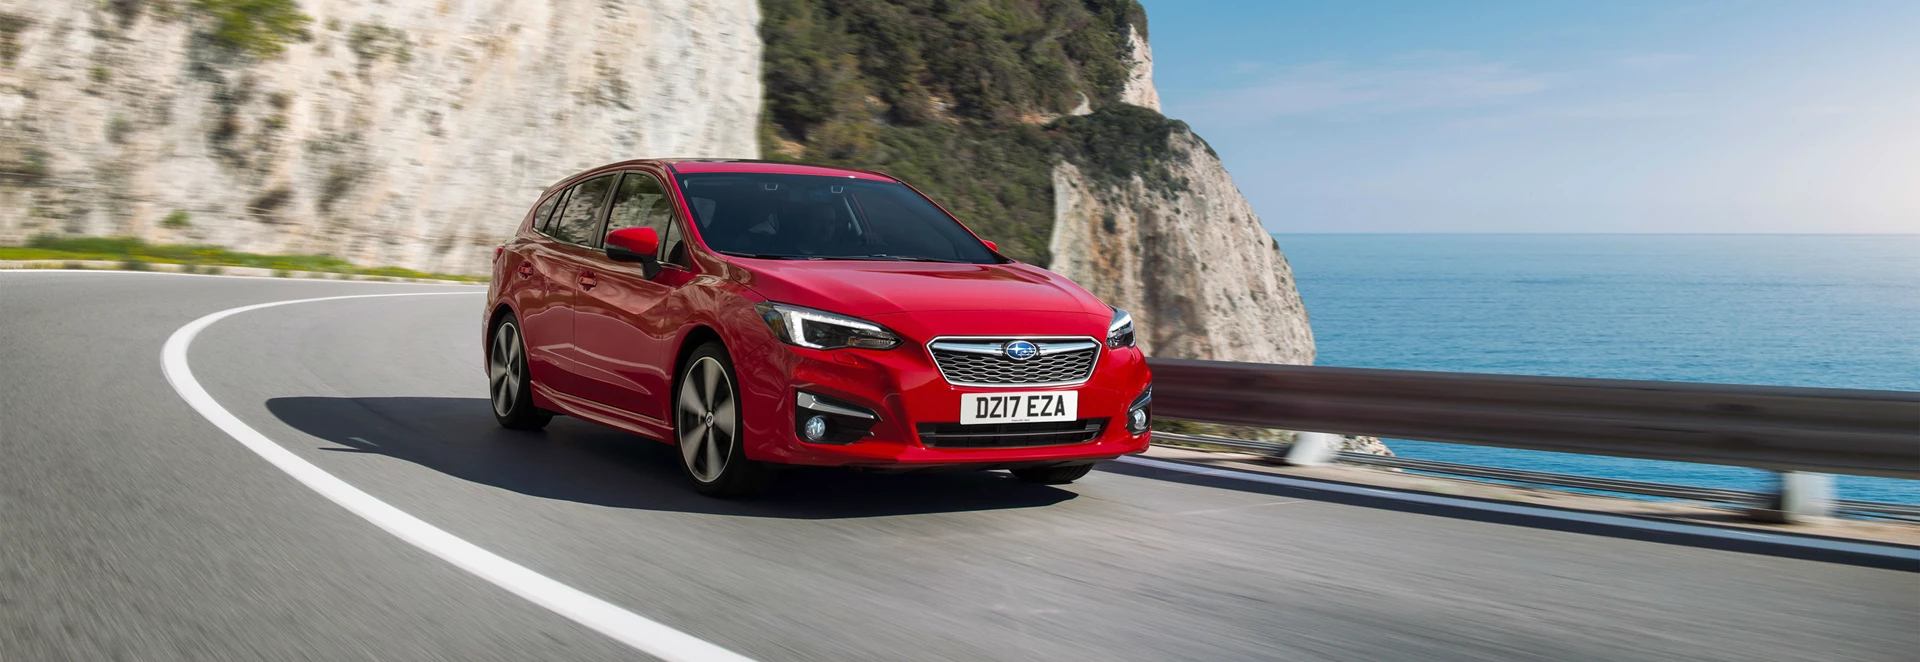 All-new 2017 Subaru Impreza is coming to the UK this year 